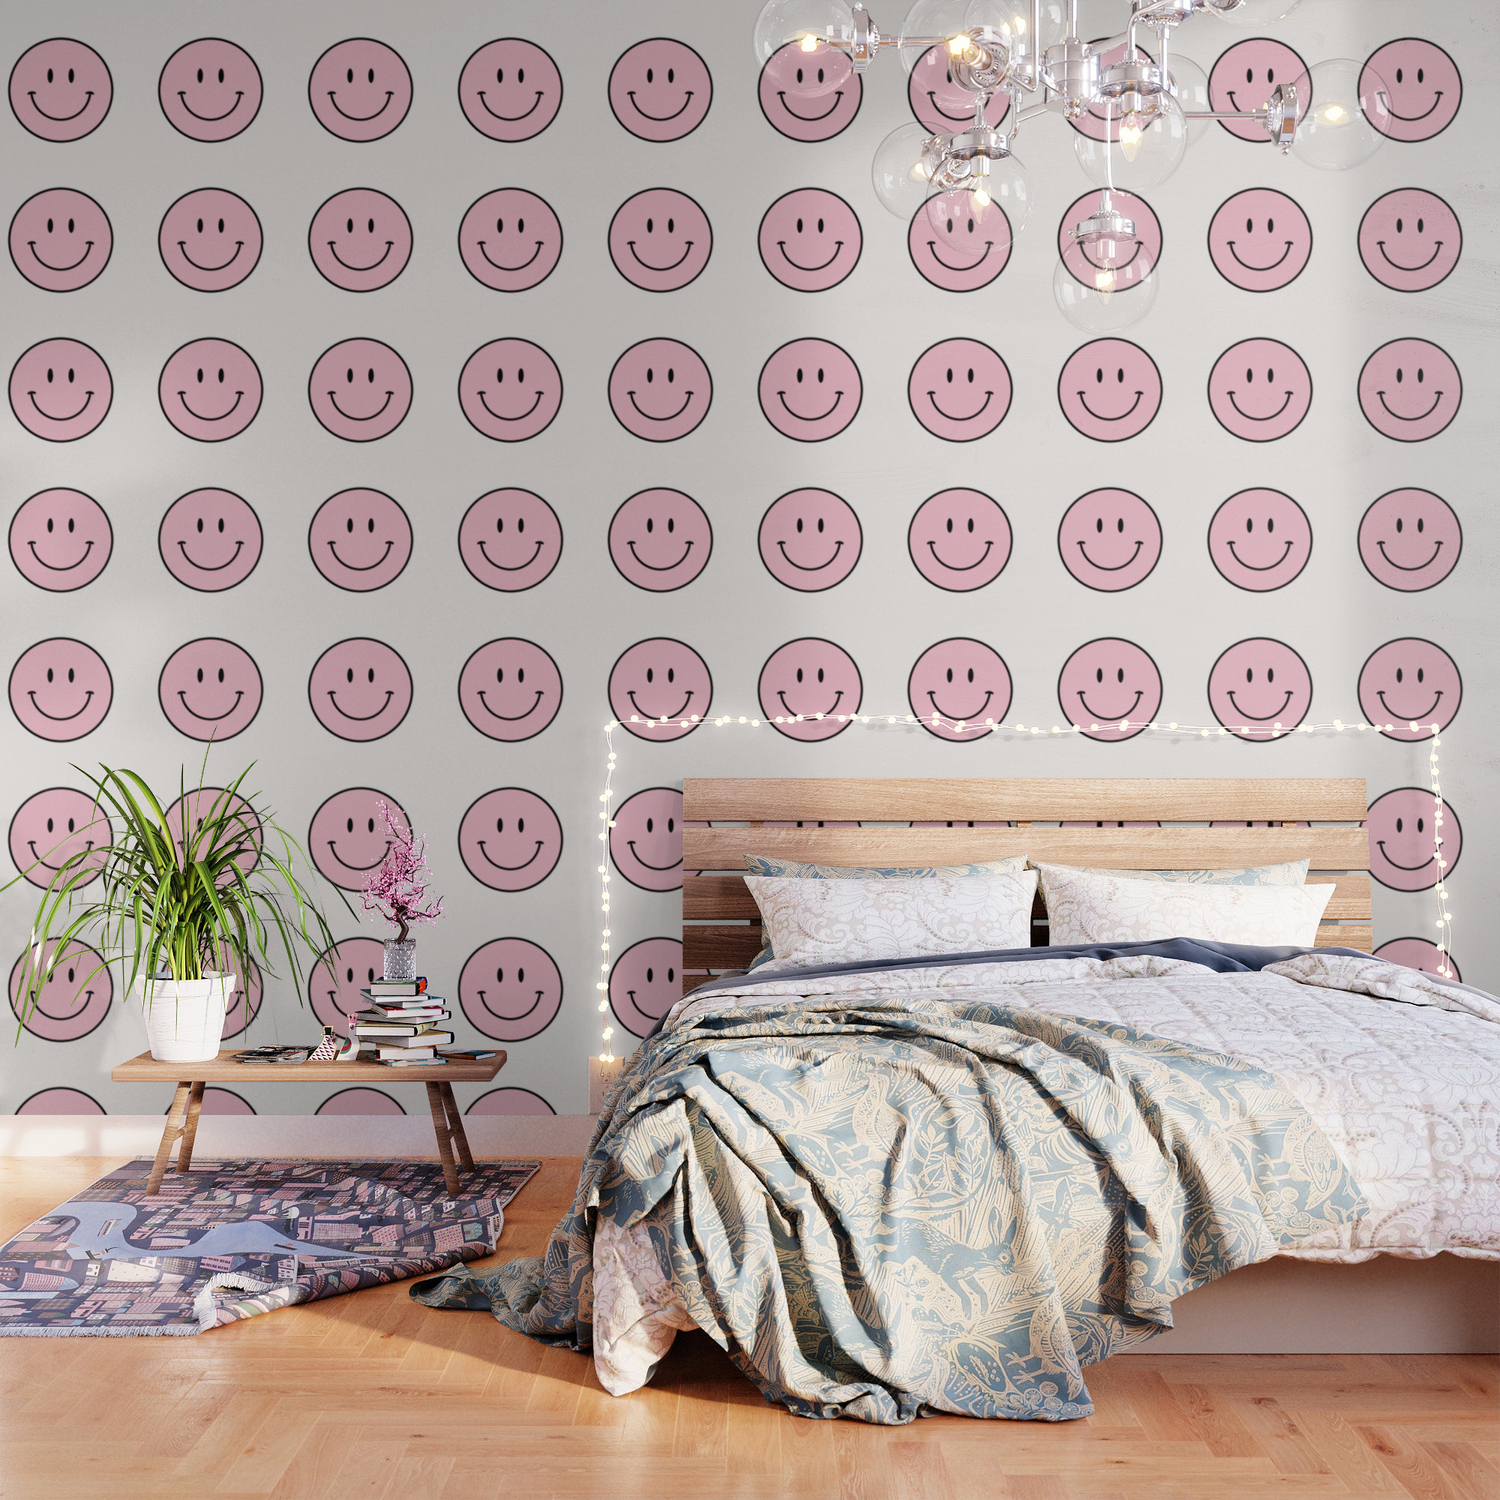 Pink Smiley Face Wallpaper by Daily Regina Designs | Society6